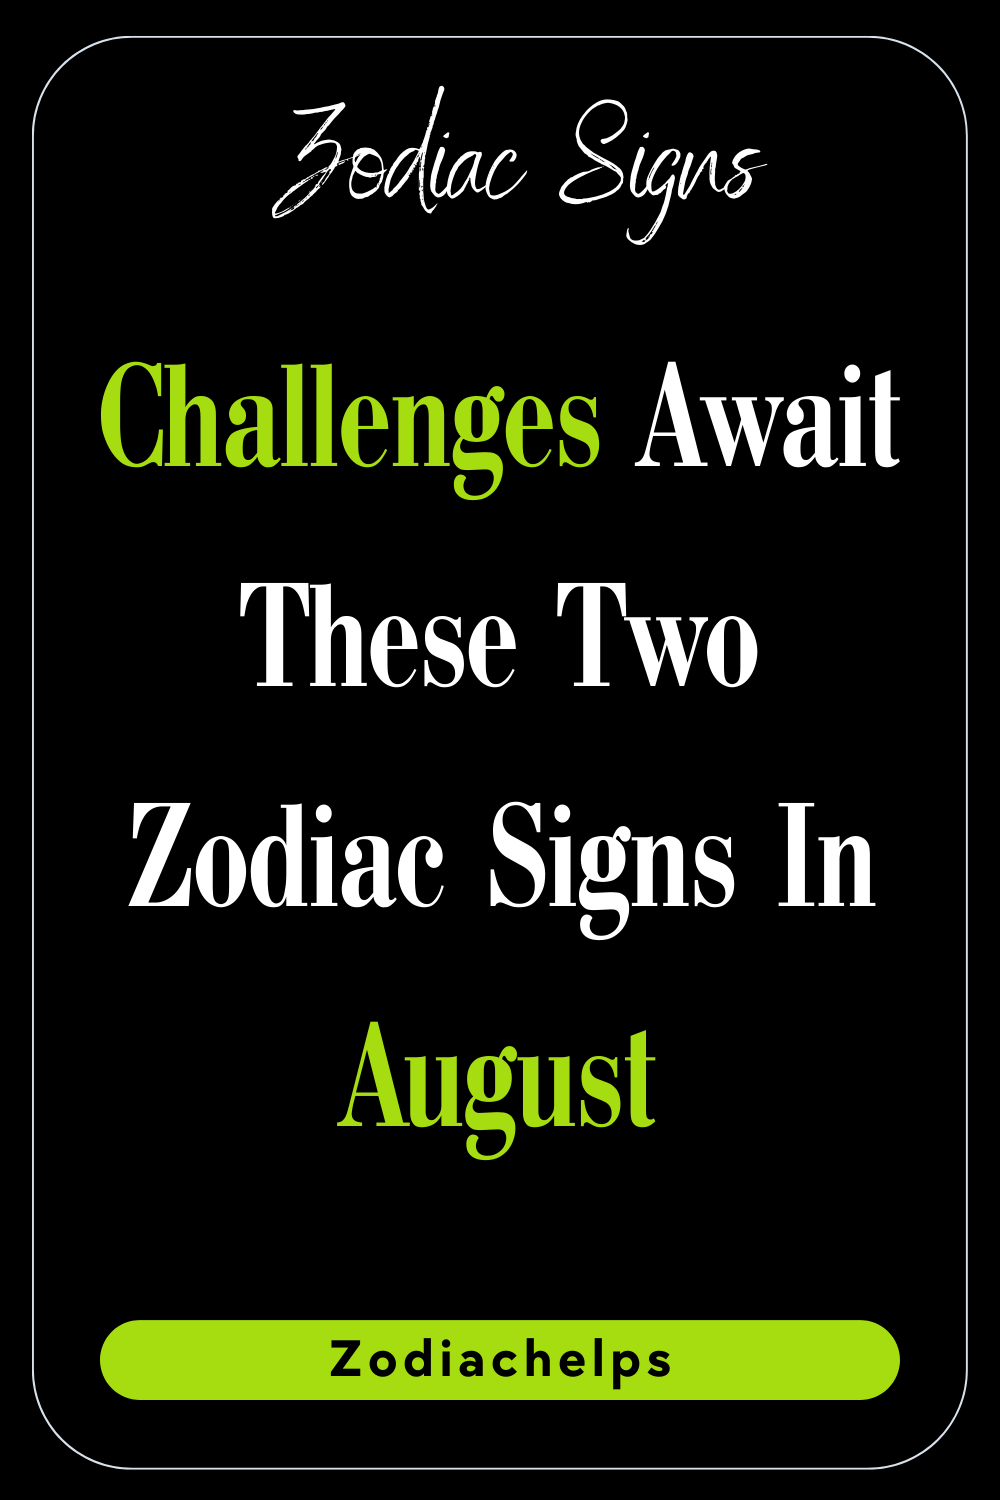 Challenges Await These Two Zodiac Signs In August